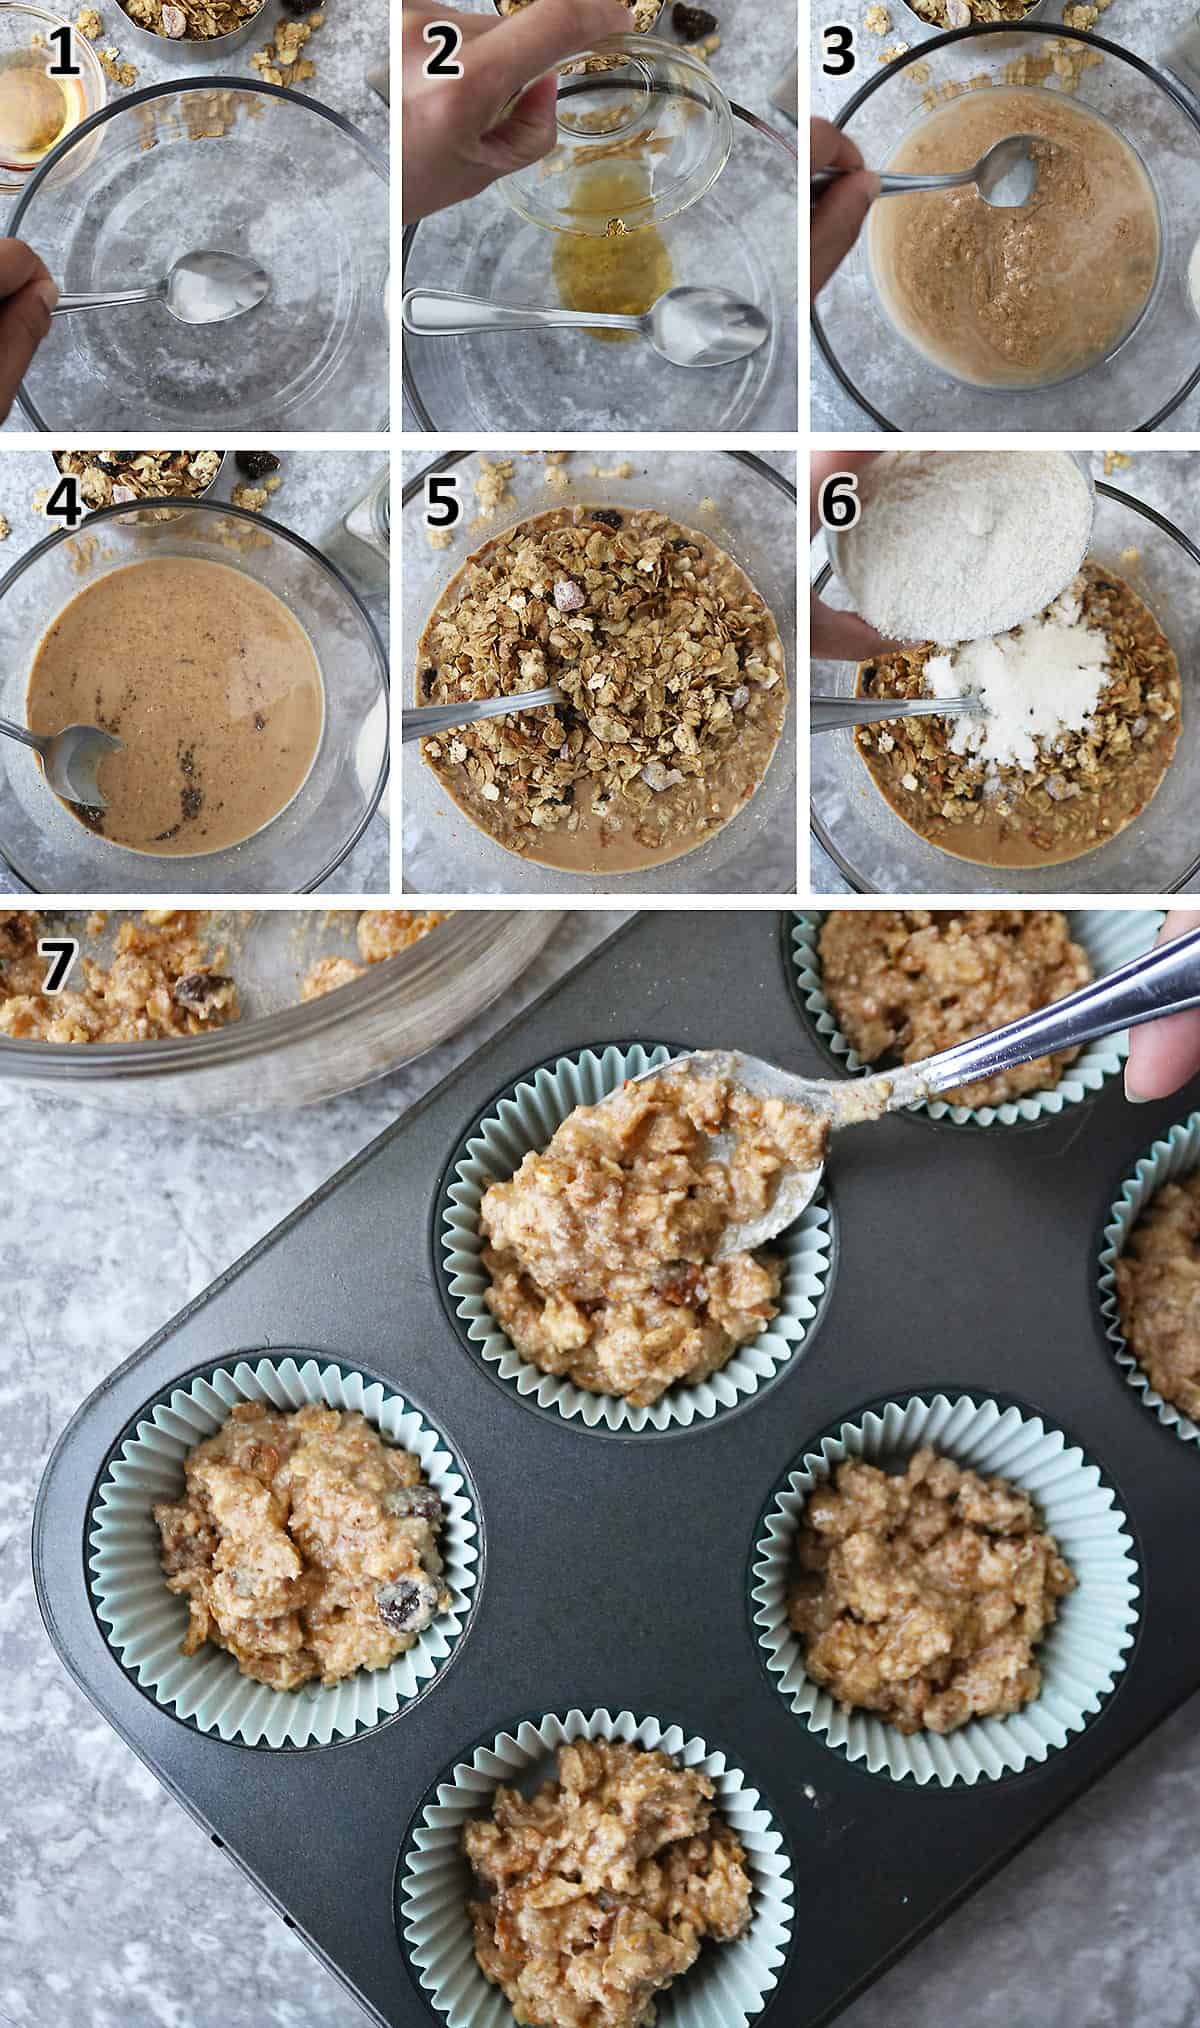 7 steps showing how to make no-bake cereal cookies